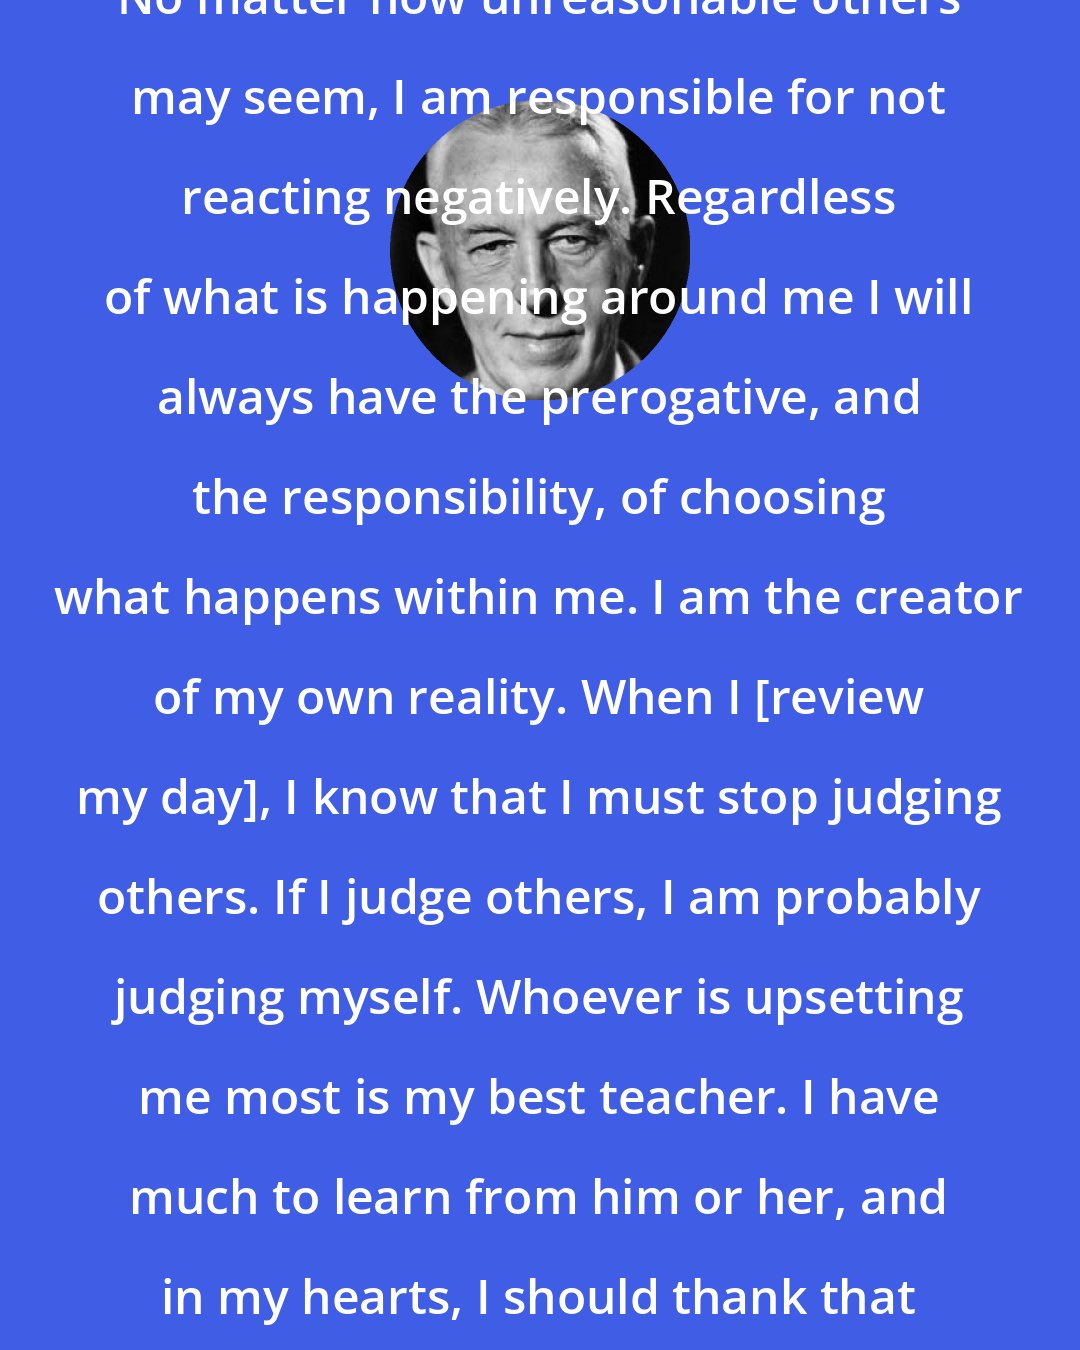 Bill W.: No matter how unreasonable others may seem, I am responsible for not reacting negatively. Regardless of what is happening around me I will always have the prerogative, and the responsibility, of choosing what happens within me. I am the creator of my own reality. When I [review my day], I know that I must stop judging others. If I judge others, I am probably judging myself. Whoever is upsetting me most is my best teacher. I have much to learn from him or her, and in my hearts, I should thank that person.